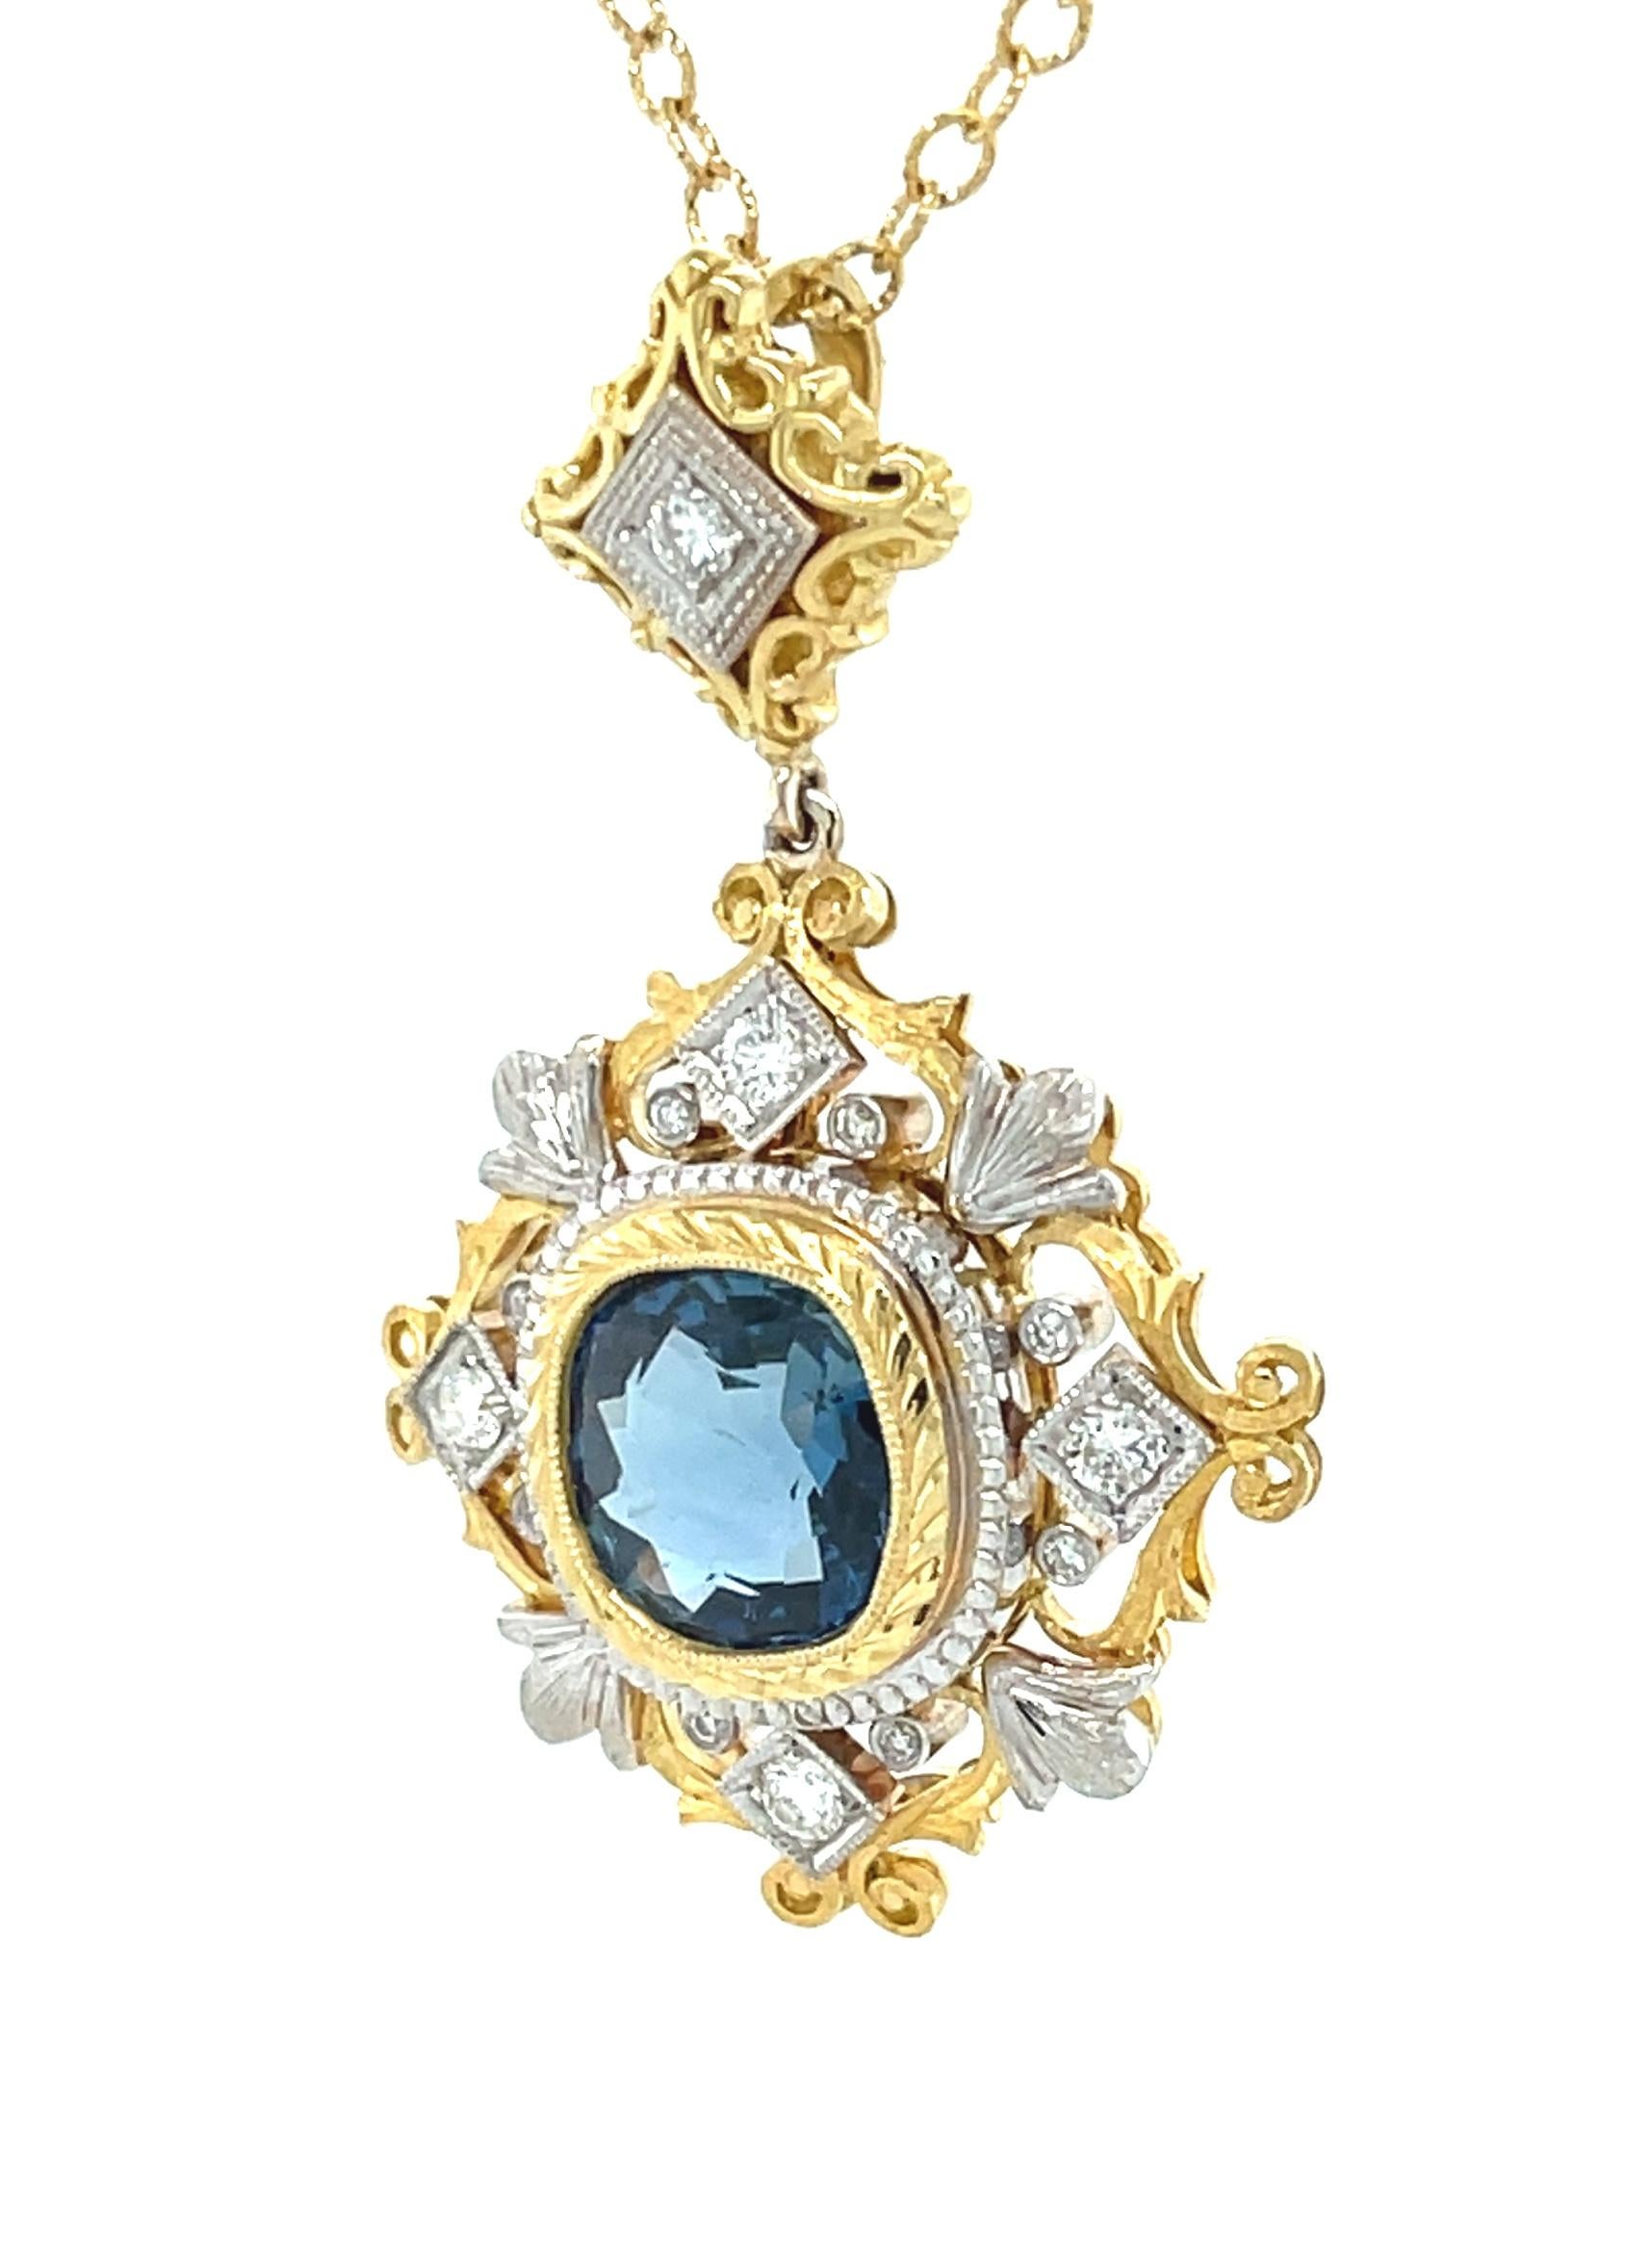 Women's 3.38 Carat Sapphire and Diamond Handmade Necklace in 18k White and Yellow Gold  For Sale